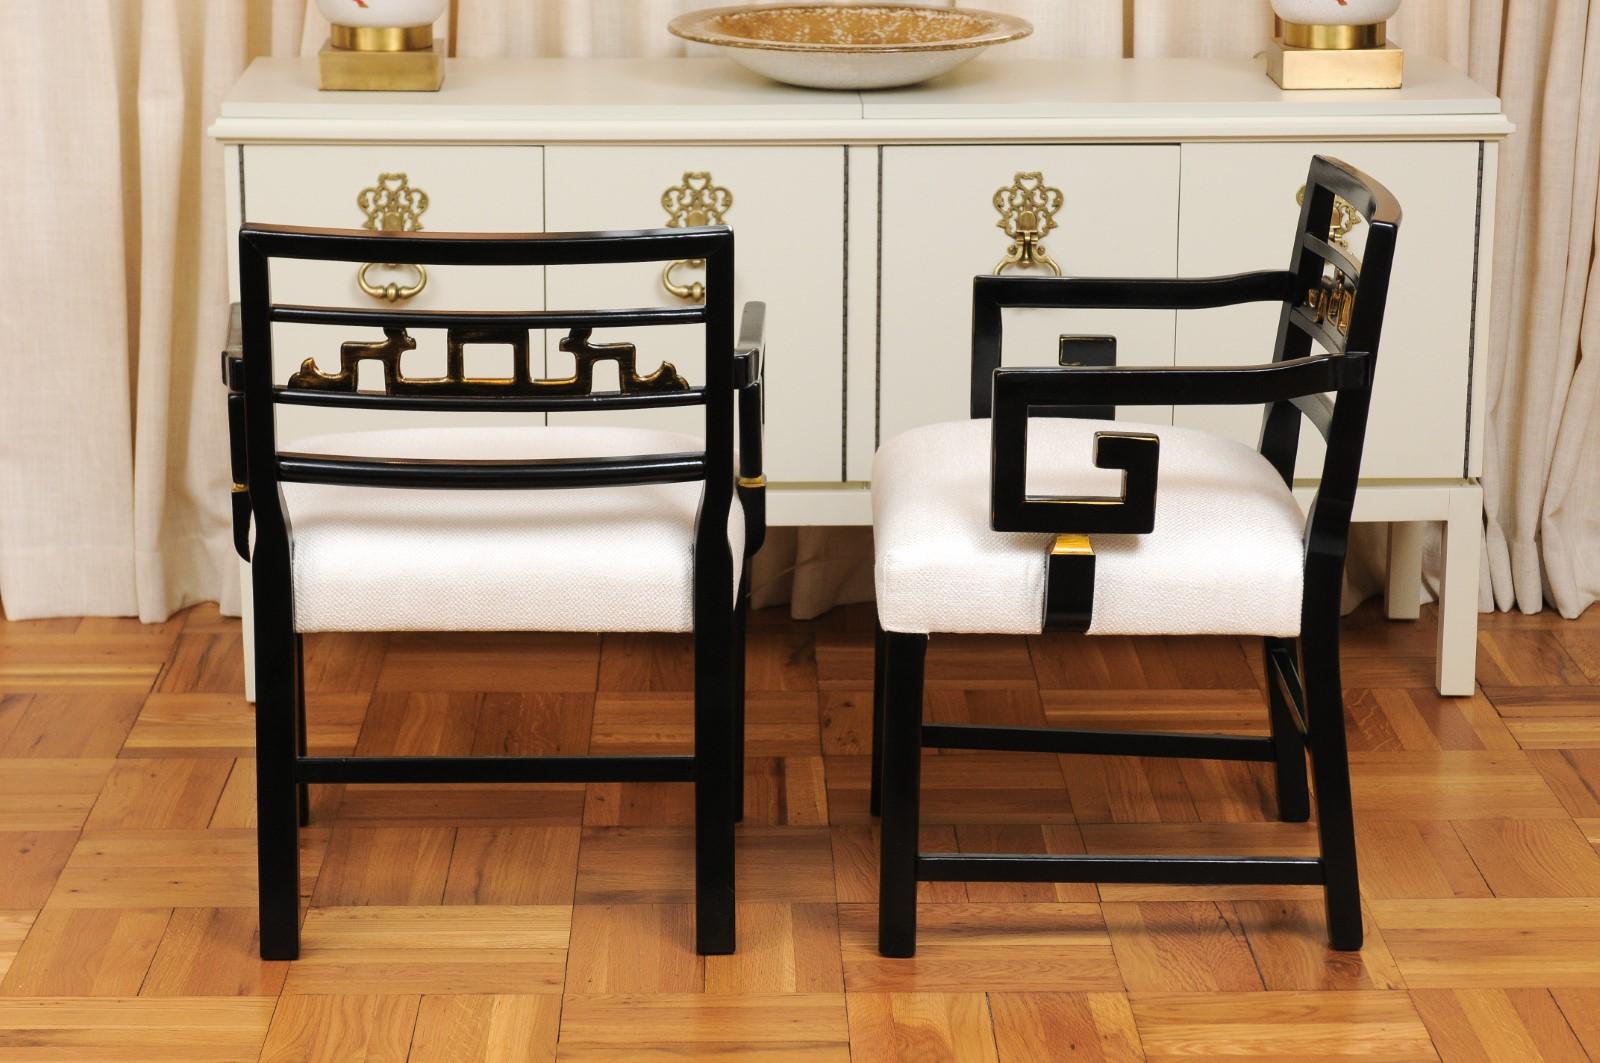 Exquisite Pair of Modern Chinoiserie Greek Key Armchairs by Baker, circa 1960 For Sale 4